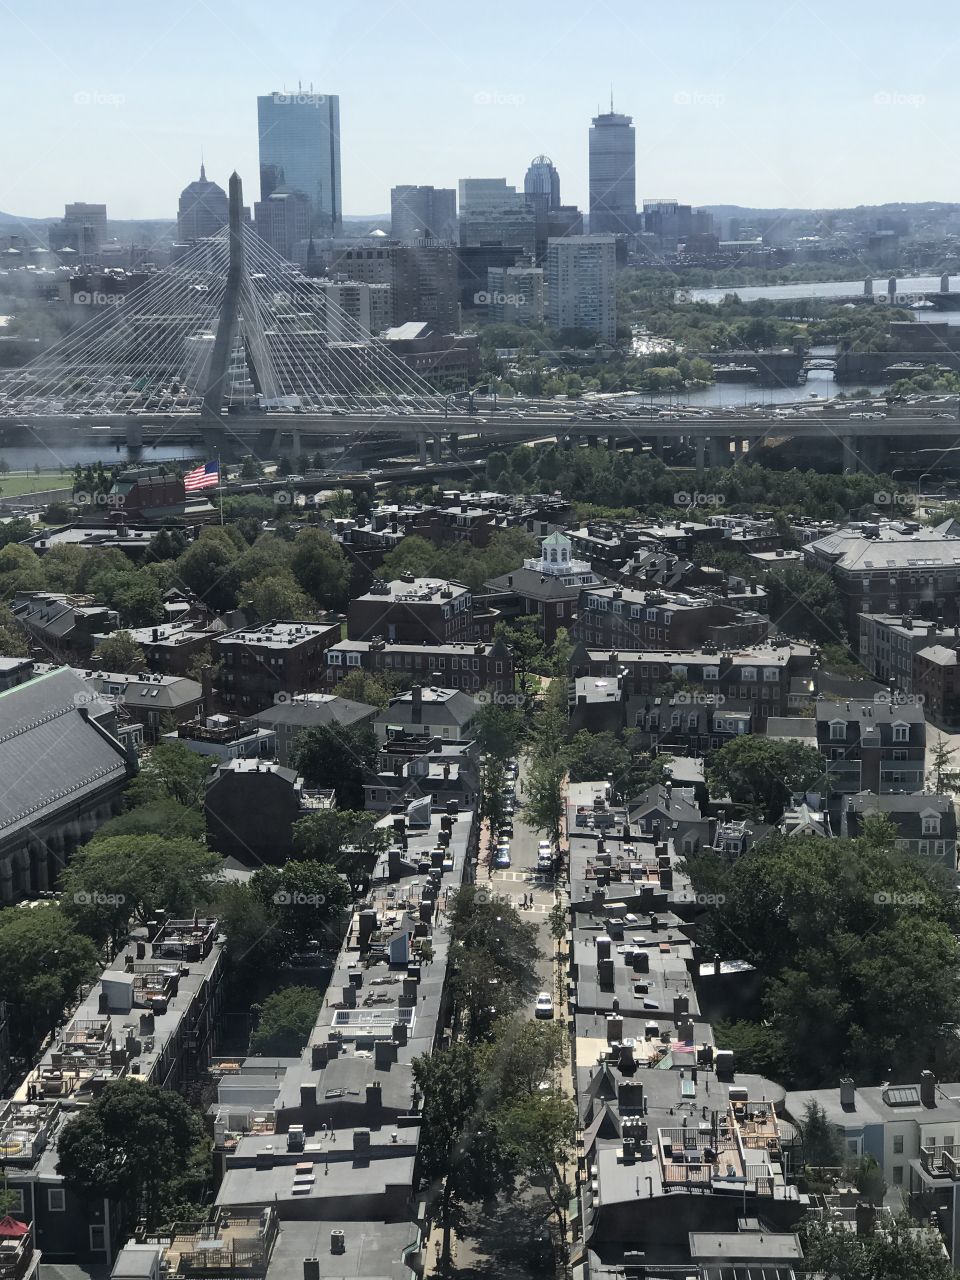 The view from Boston’s bunker hill